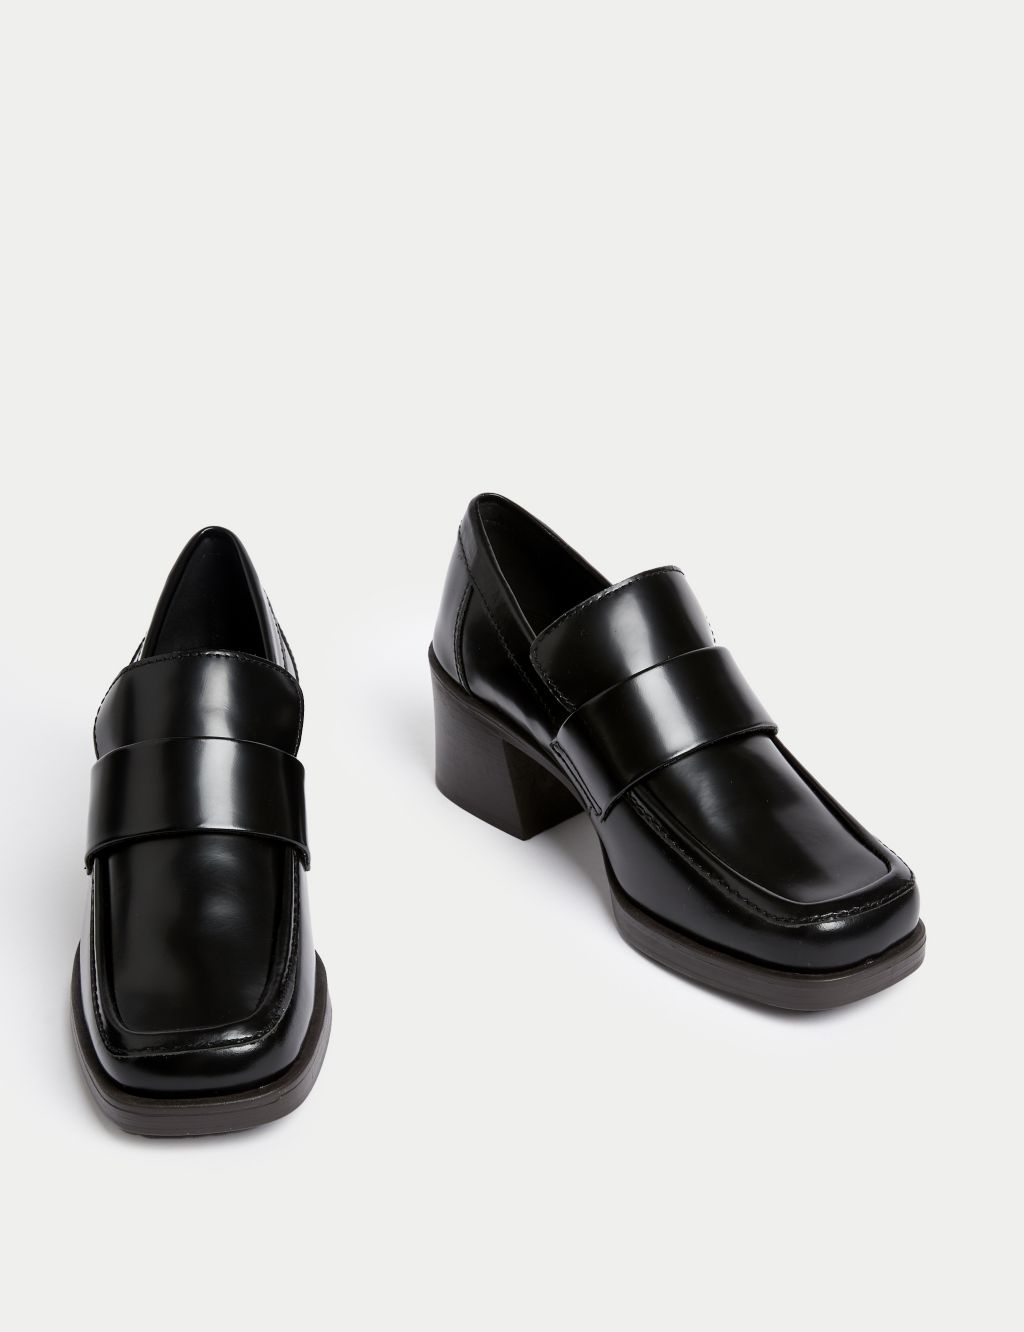 Leather Block Heel Square Toe Loafers image 2